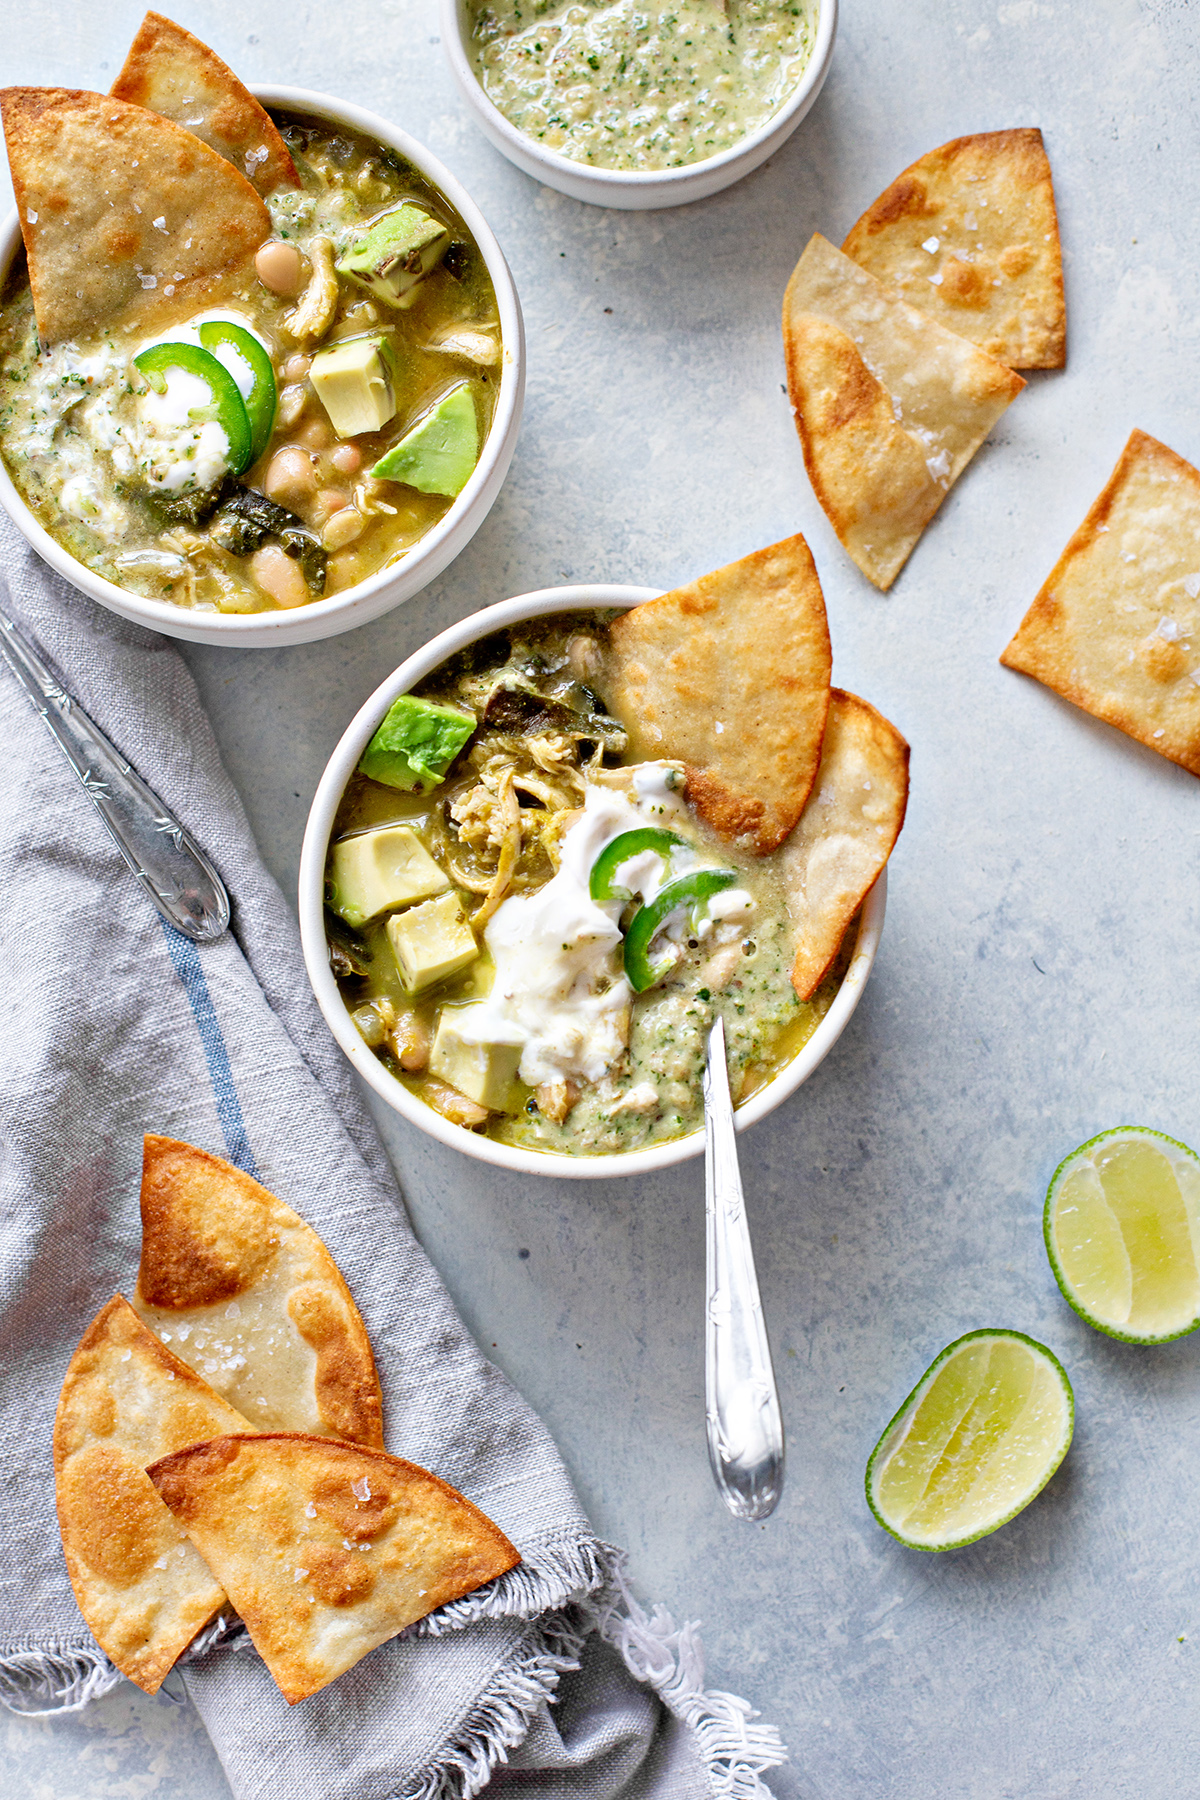 Chicken Chili Verde with White Beans (So Good!) | Good Life Eats